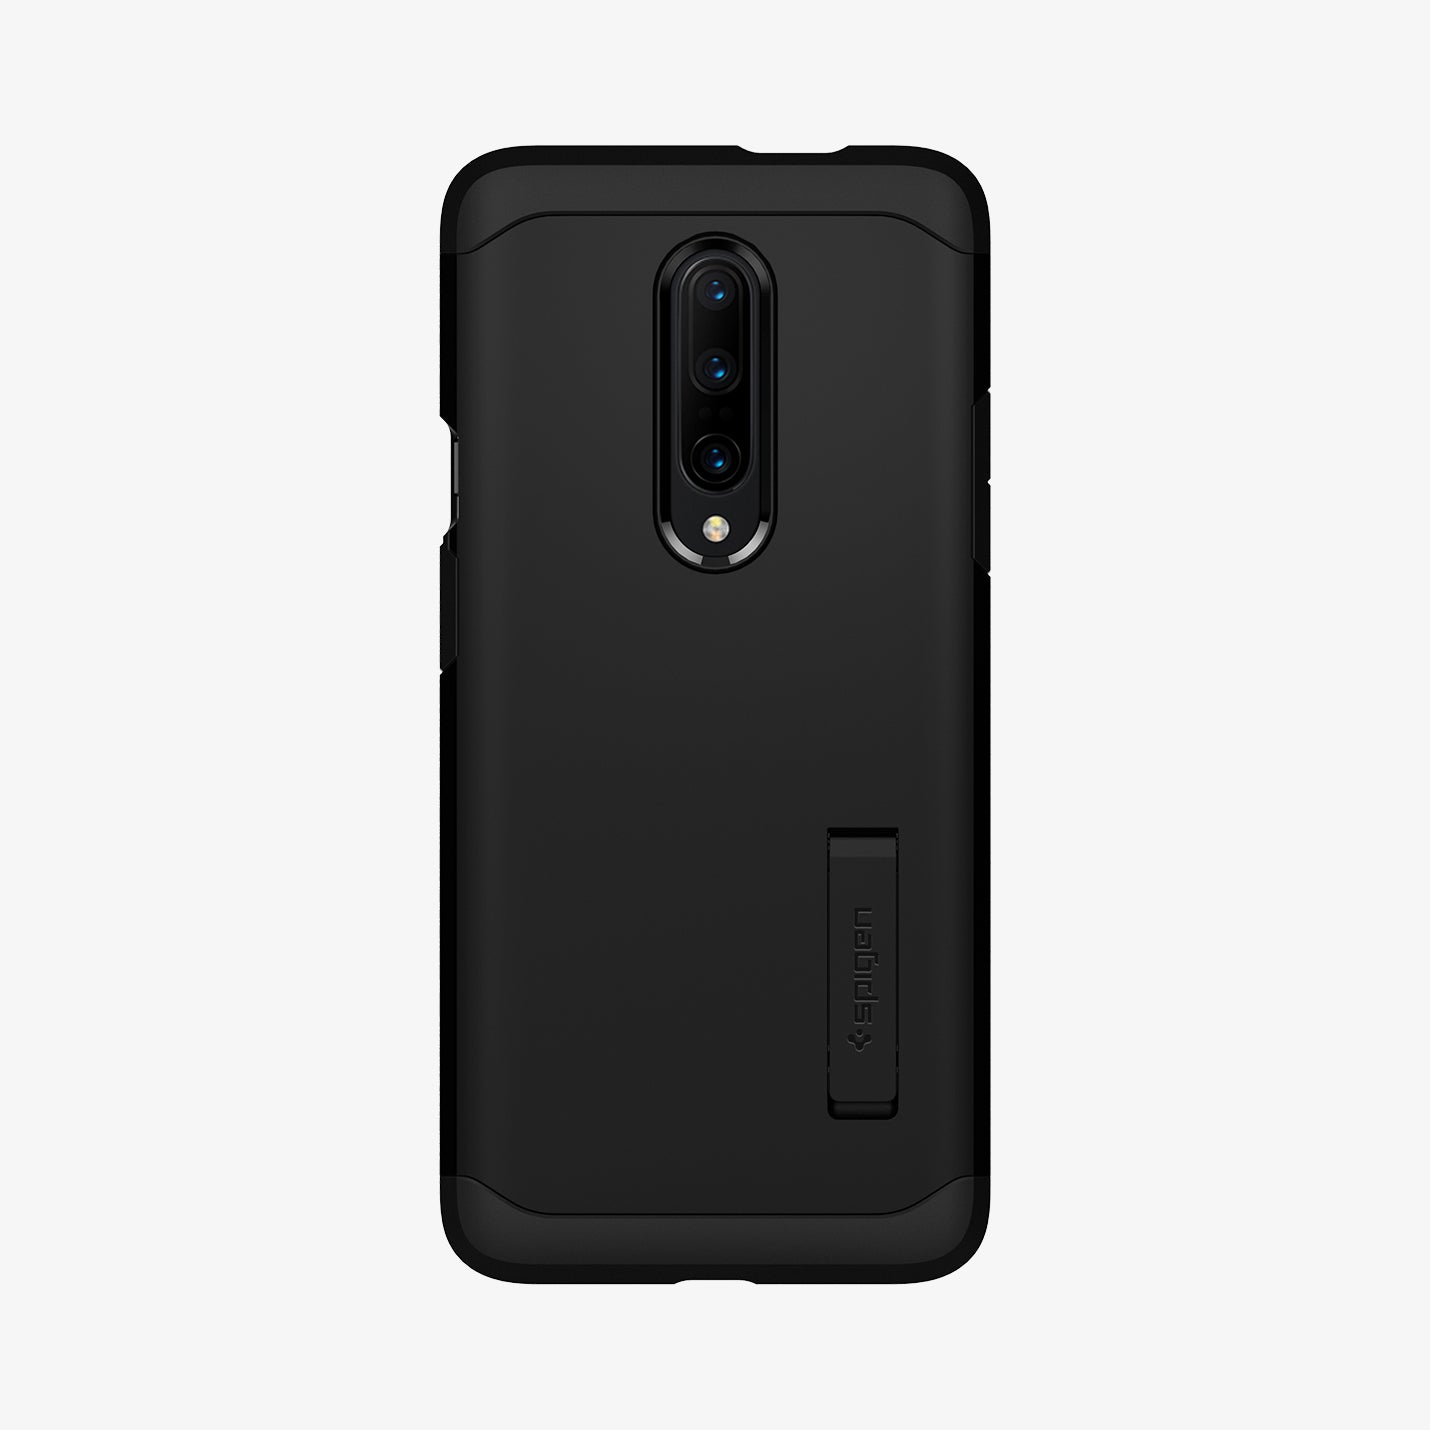 K09CS26485 - OnePlus 7 Pro Tough Armor Case in Black showing the back